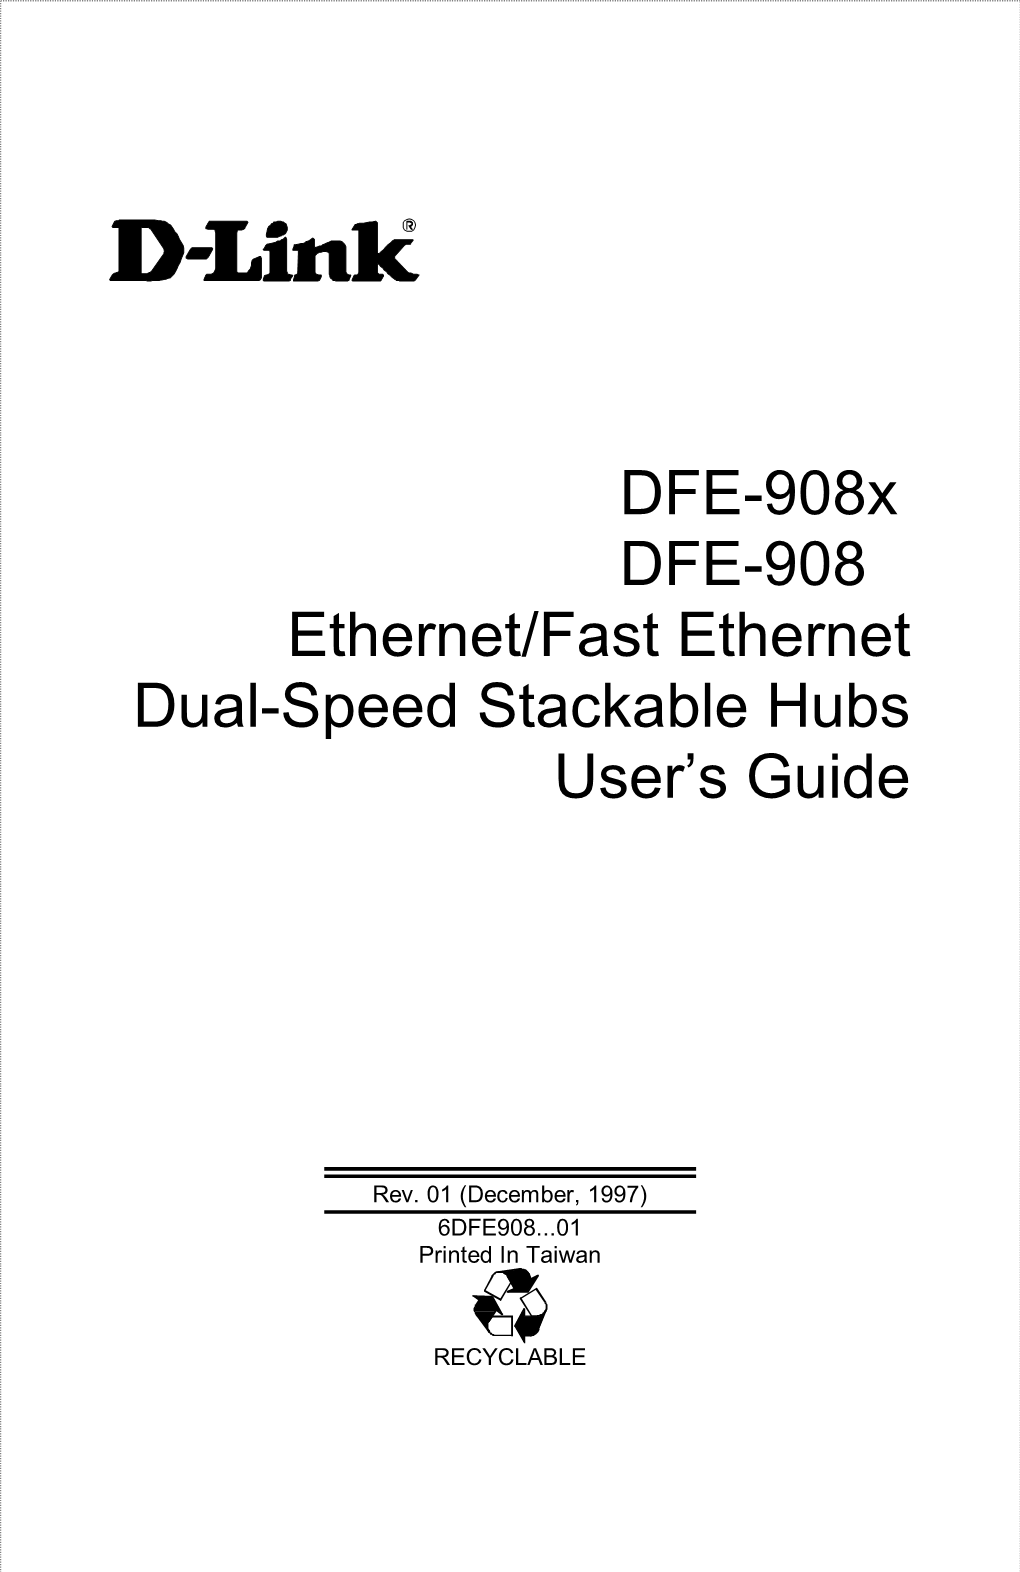 DFE-908X DFE-908 Ethernet/Fast Ethernet Dual-Speed Stackable Hubs User’S Guide